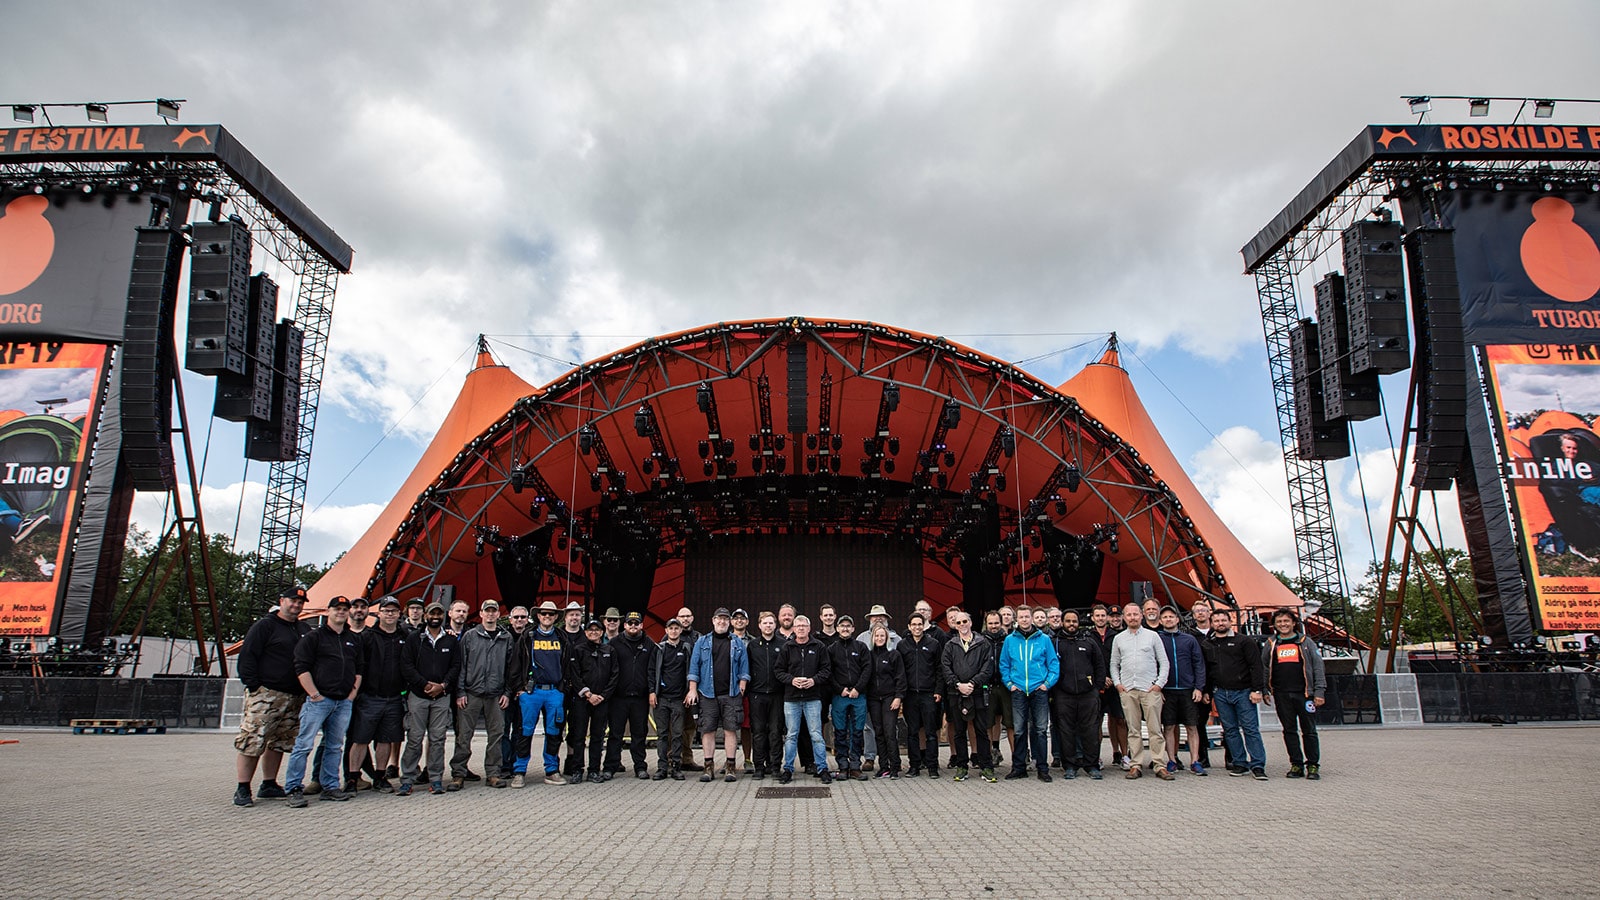 2019 Roskilde Festival, Meyer Sound, and Bright Group Team